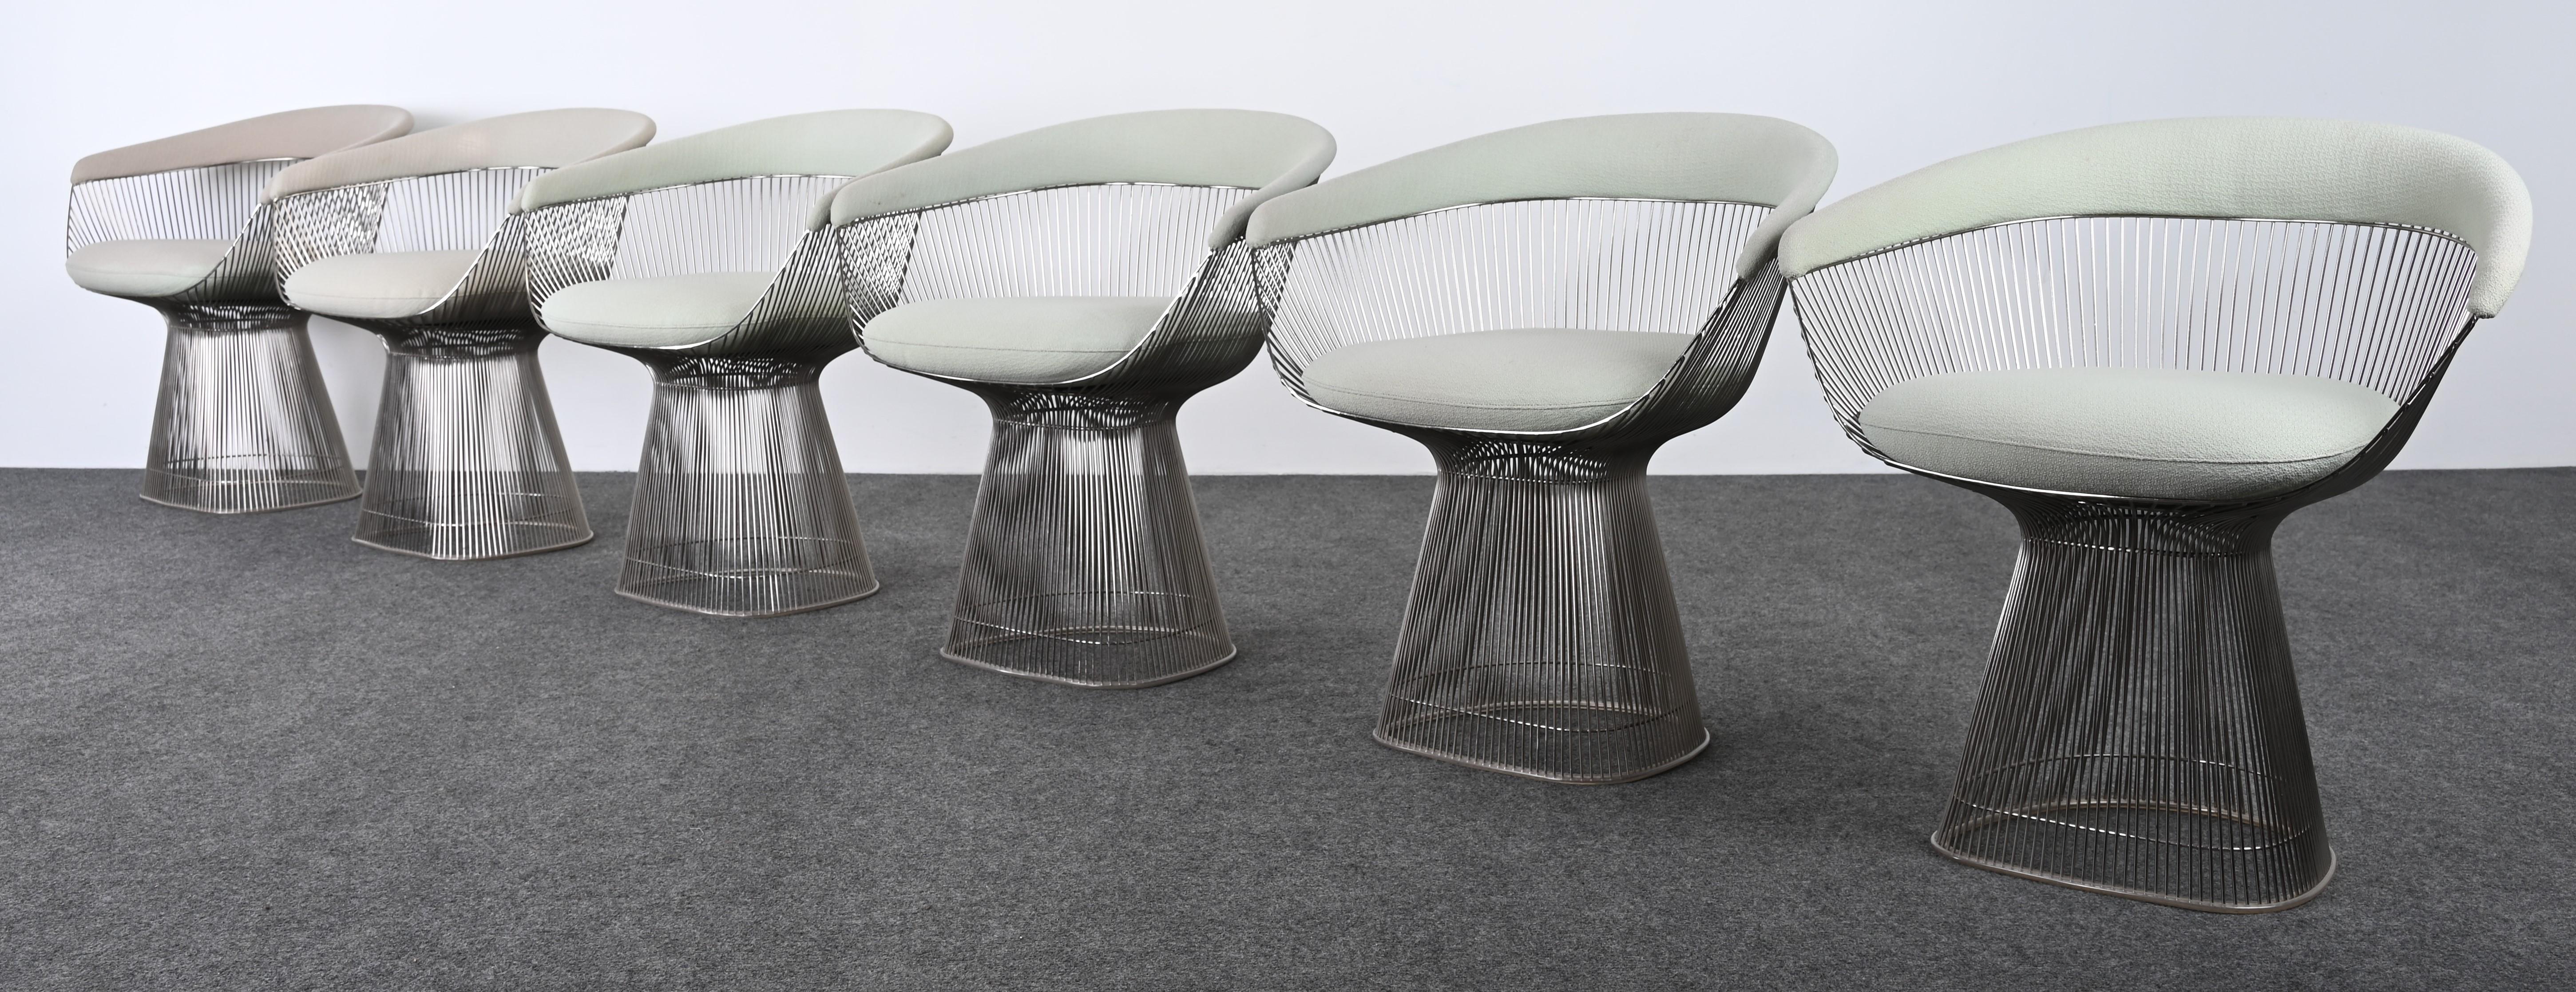 An exquisite set of six dining chairs designed by Warren Platner for Knoll. These iconic dining room chairs would look great in any Contemporary, Transitional, or Traditional interior. This set has a timeless design that will never go out of style.